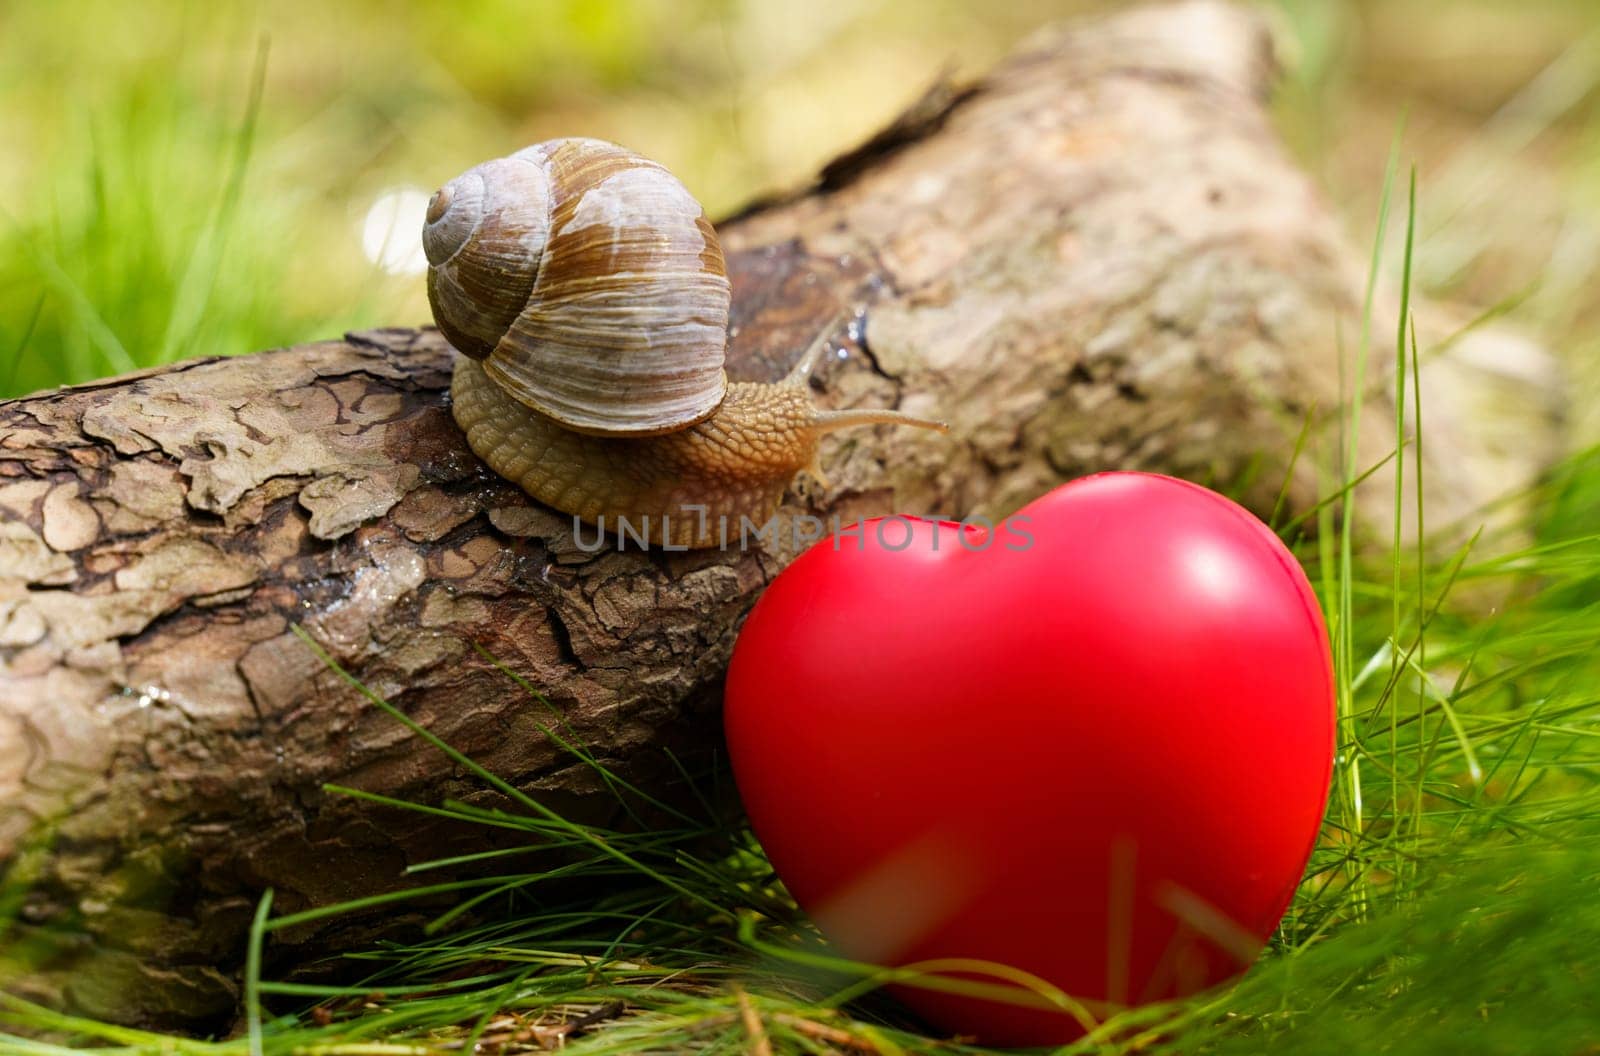 The snail crawls up the tree near the heart, which lies in the grass. Concept of ecology and positive